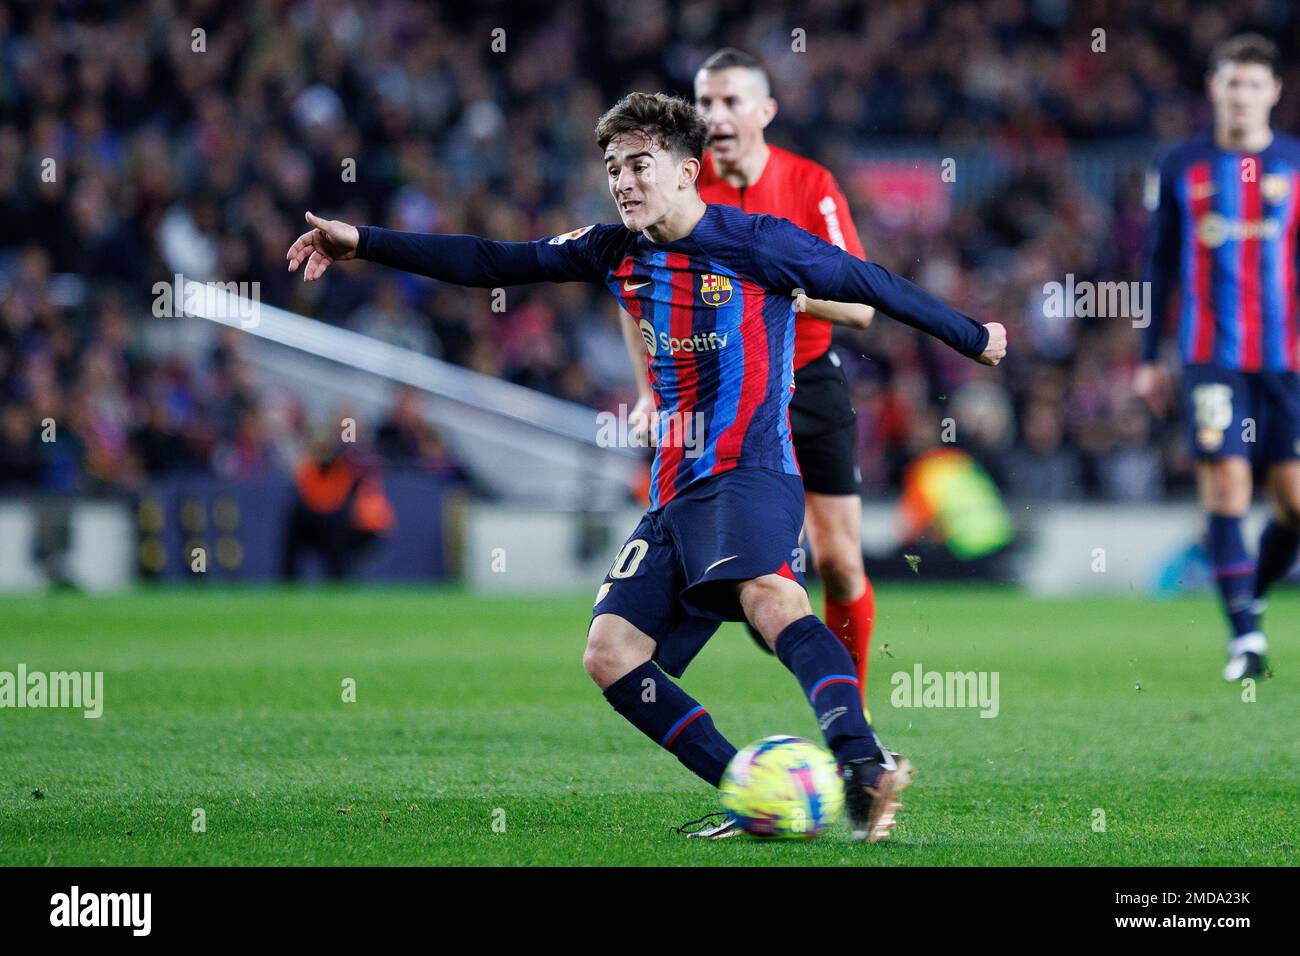 Barcelona, Spain. 22th Jan, 2023. Gavi in action during the LaLiga match between FC Barcelona and Getafe CF at the Spotify Camp Nou Stadium in Barcelona, Spain. Credit: Christian Bertrand/Alamy Live News Stock Photo